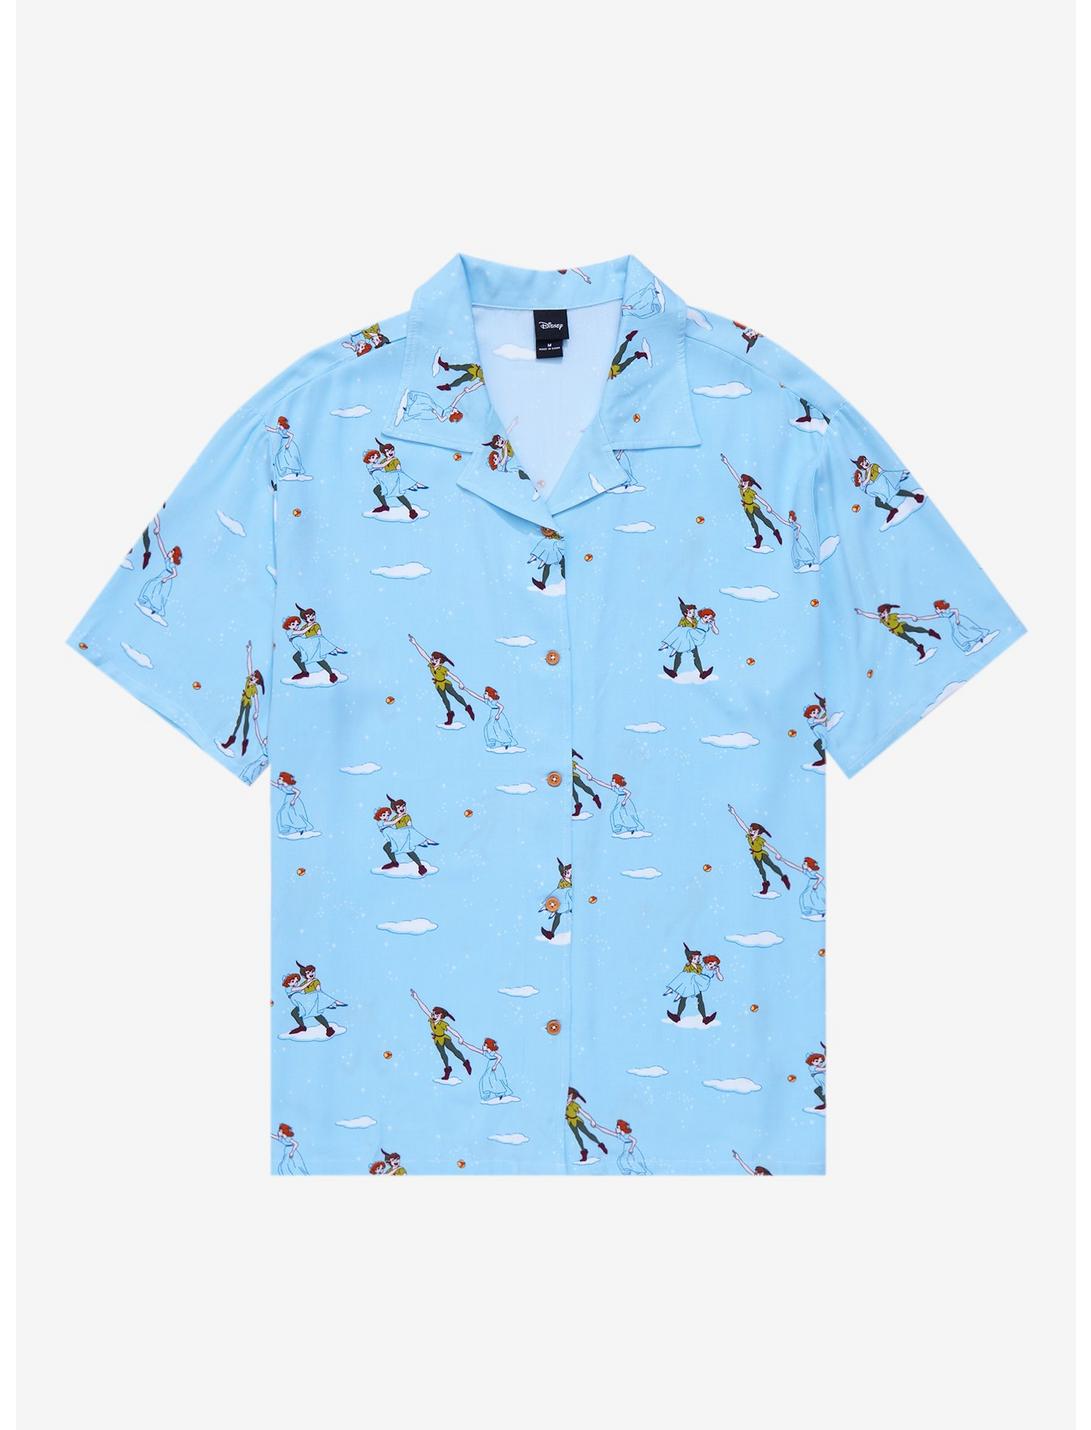 Disney Peter Pan Flying Allover Print Woven Button-Up - BoxLunch Exclusive, LIGHT BLUE, hi-res